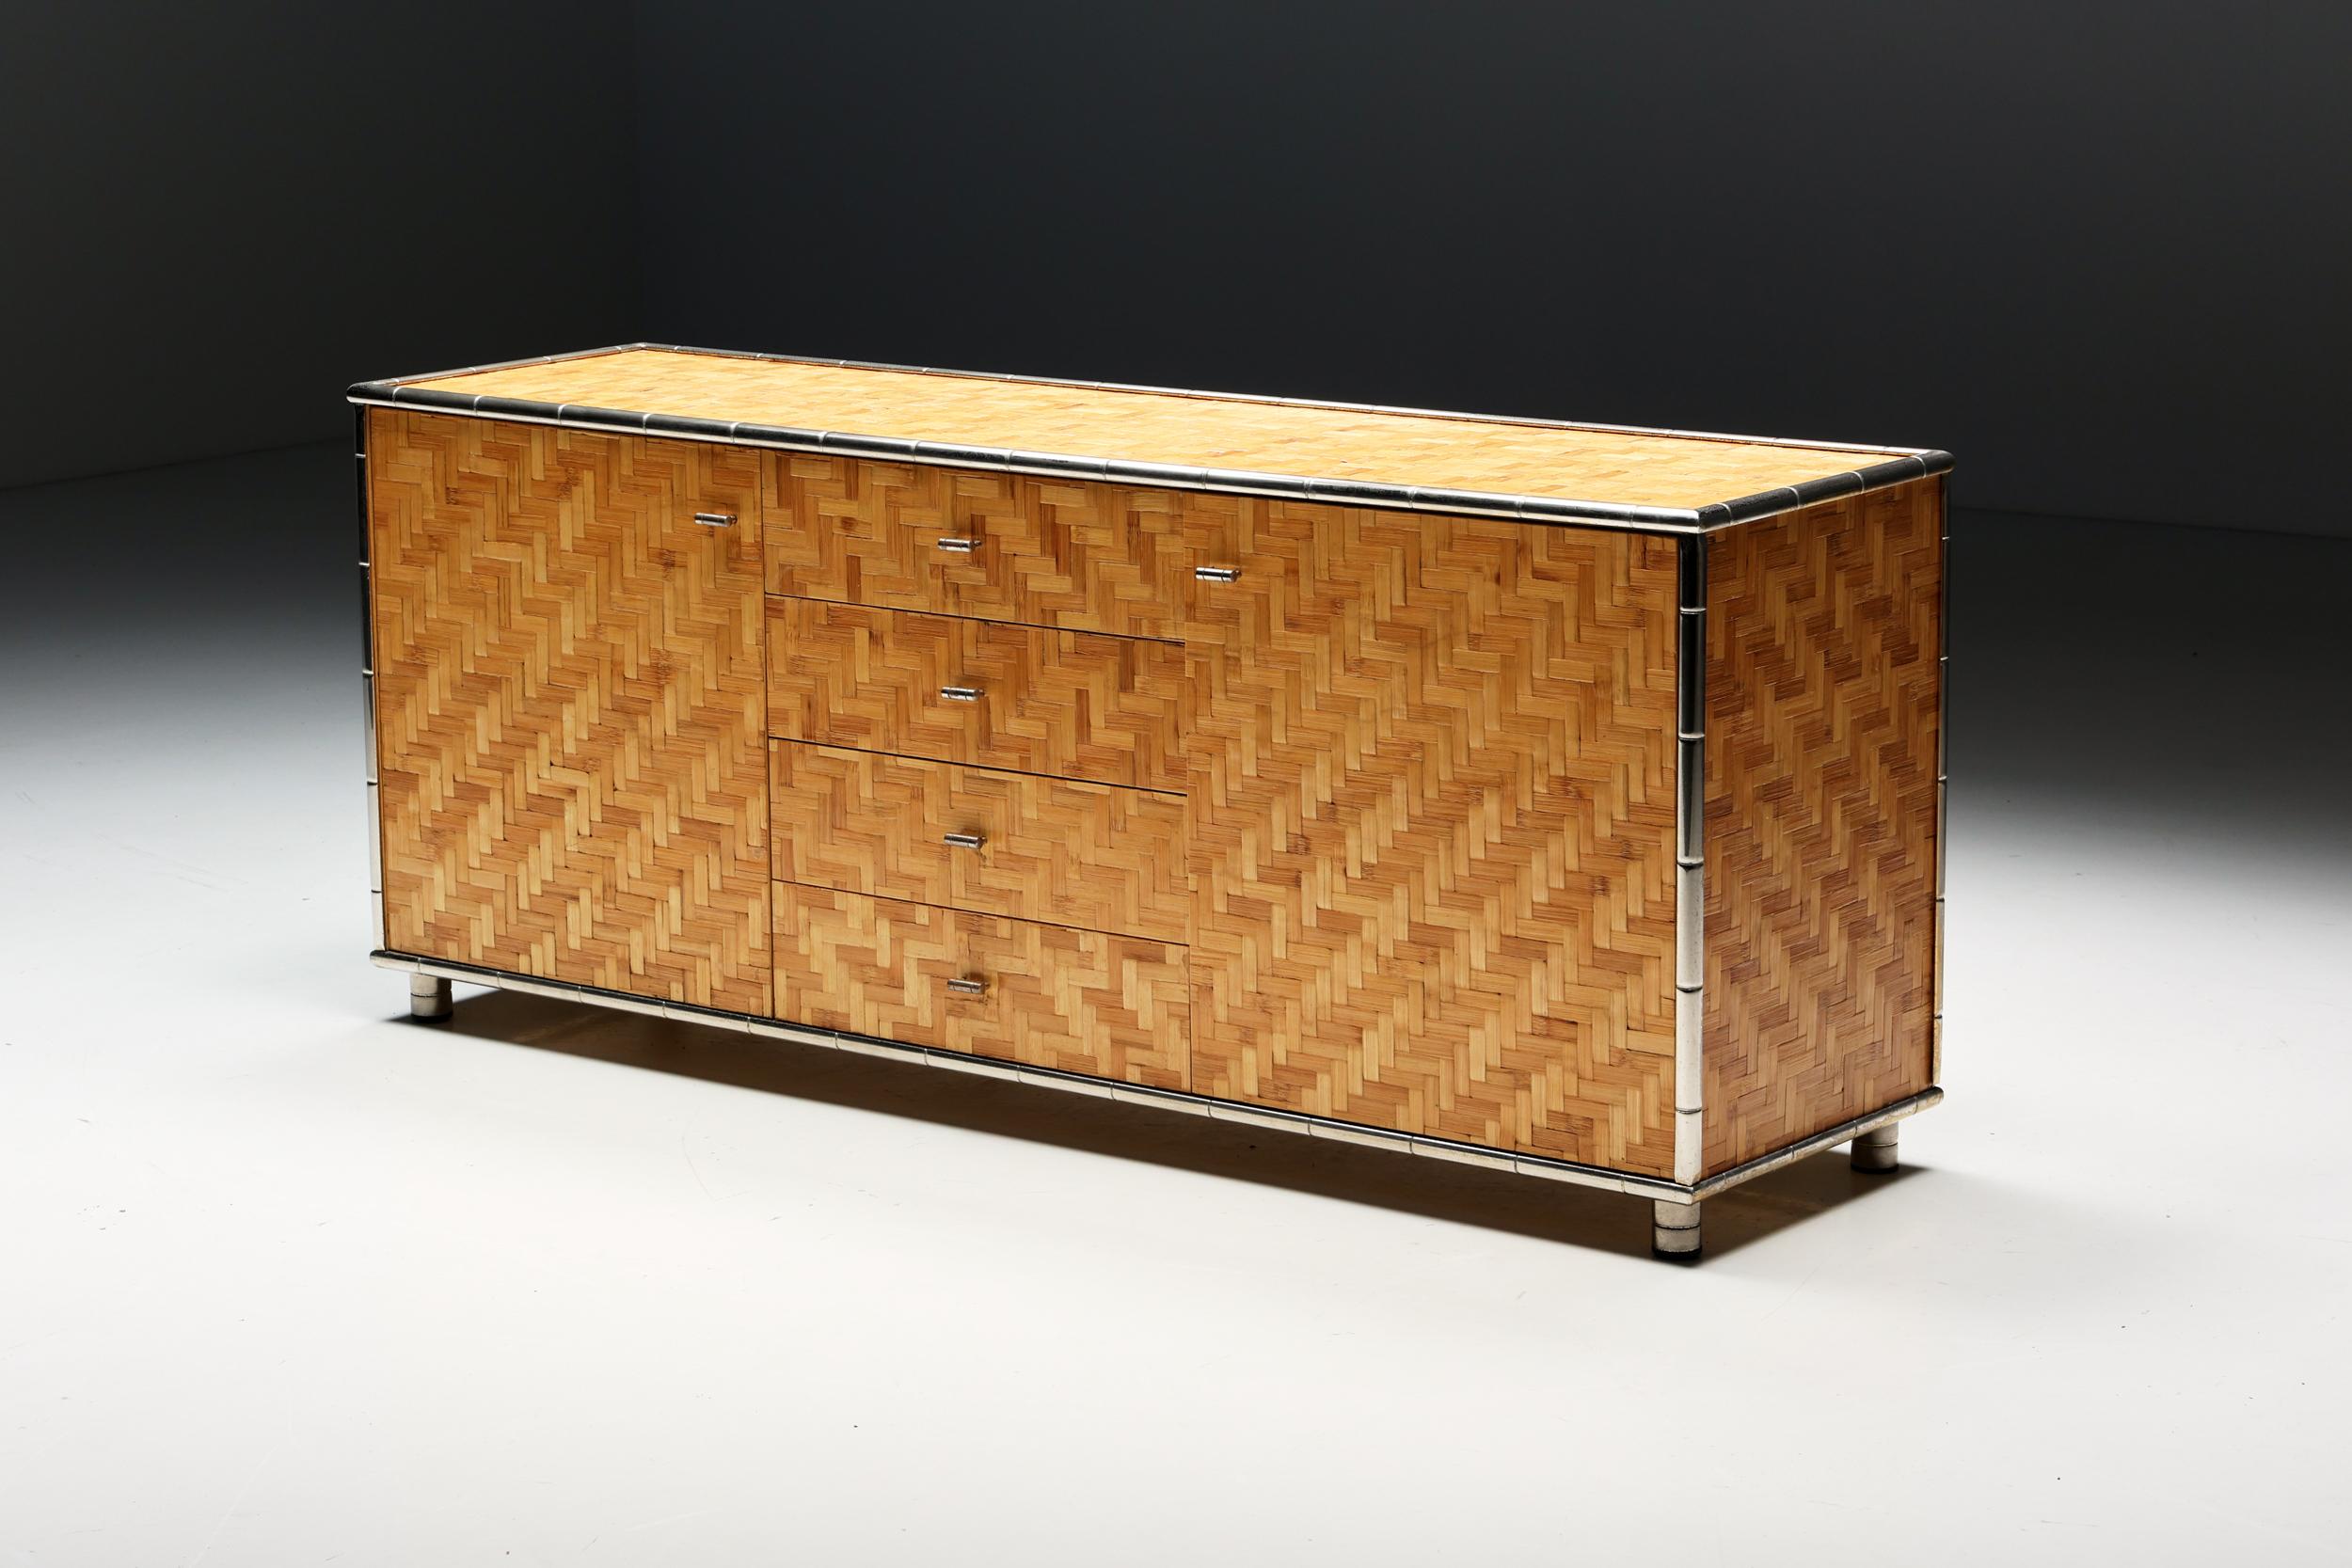 Sideboard; Credenza; Mid-Century Modern; Bamboo; 1970s; Tropical; Hollywood Regency; Vivai Del Sud;

Tropical sideboard from the 1970s for Vivai Del Sud. This credenza features two doors with knobs and four drawers, providing ample storage space